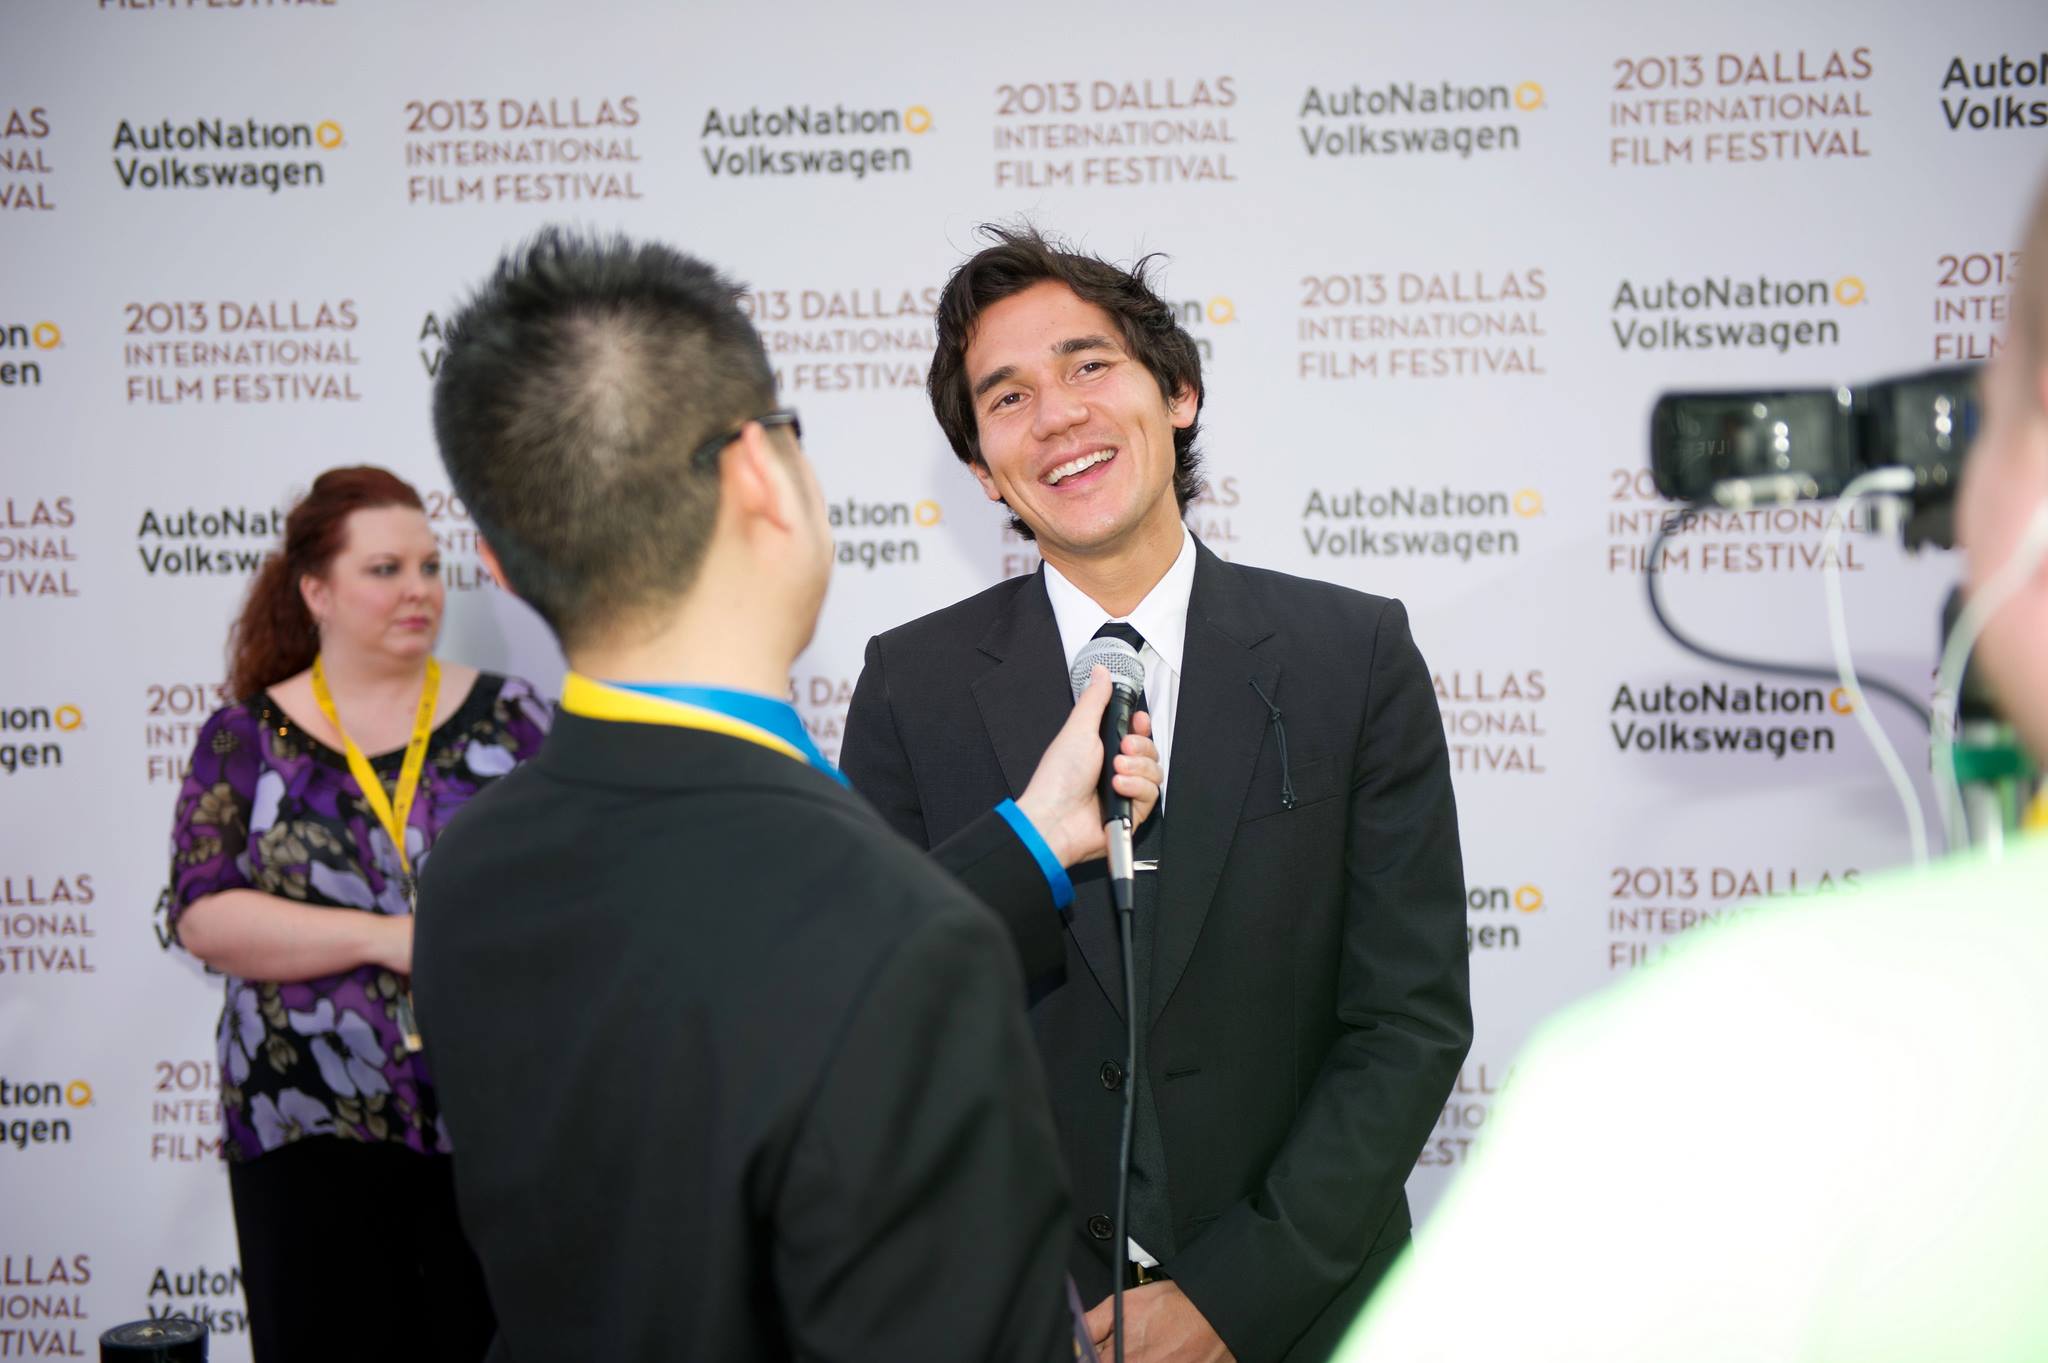 Scotty Crowe on the Red Carpet at the 2013 Dallas International Film Festival.